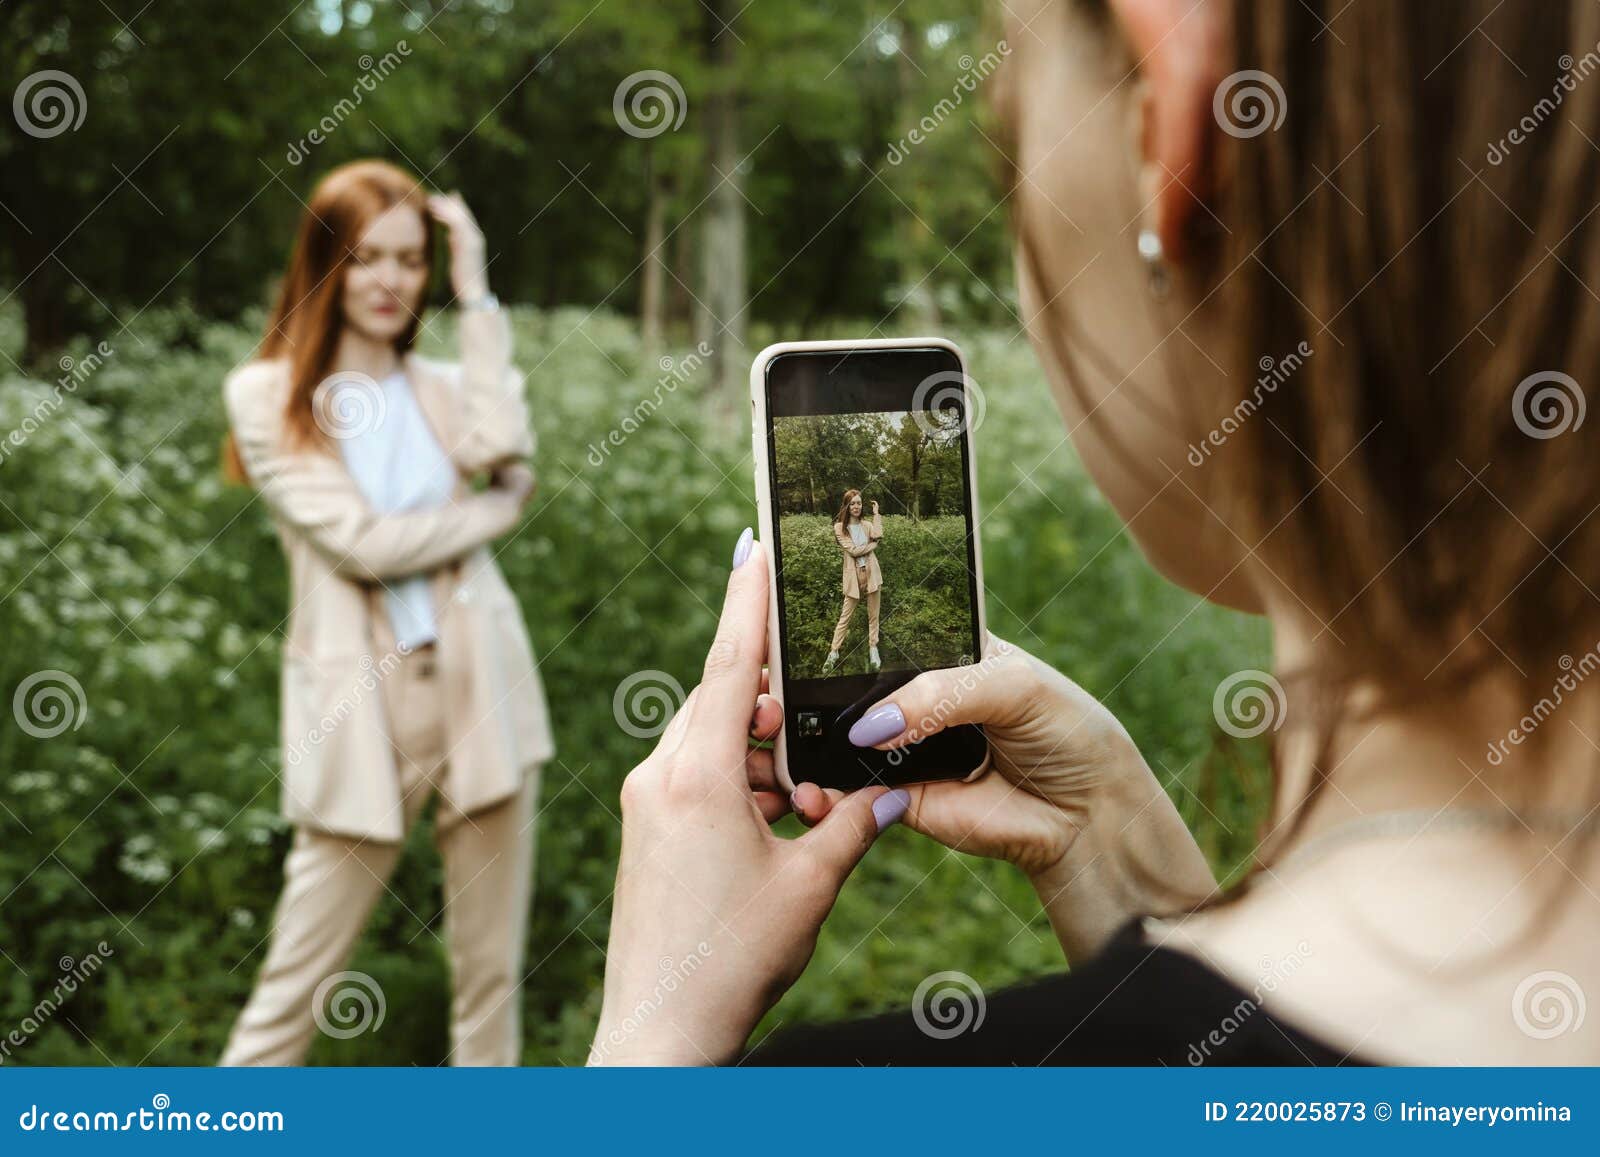 Back View Of Young Woman Holding Cell Phone And Making Photo Of Her